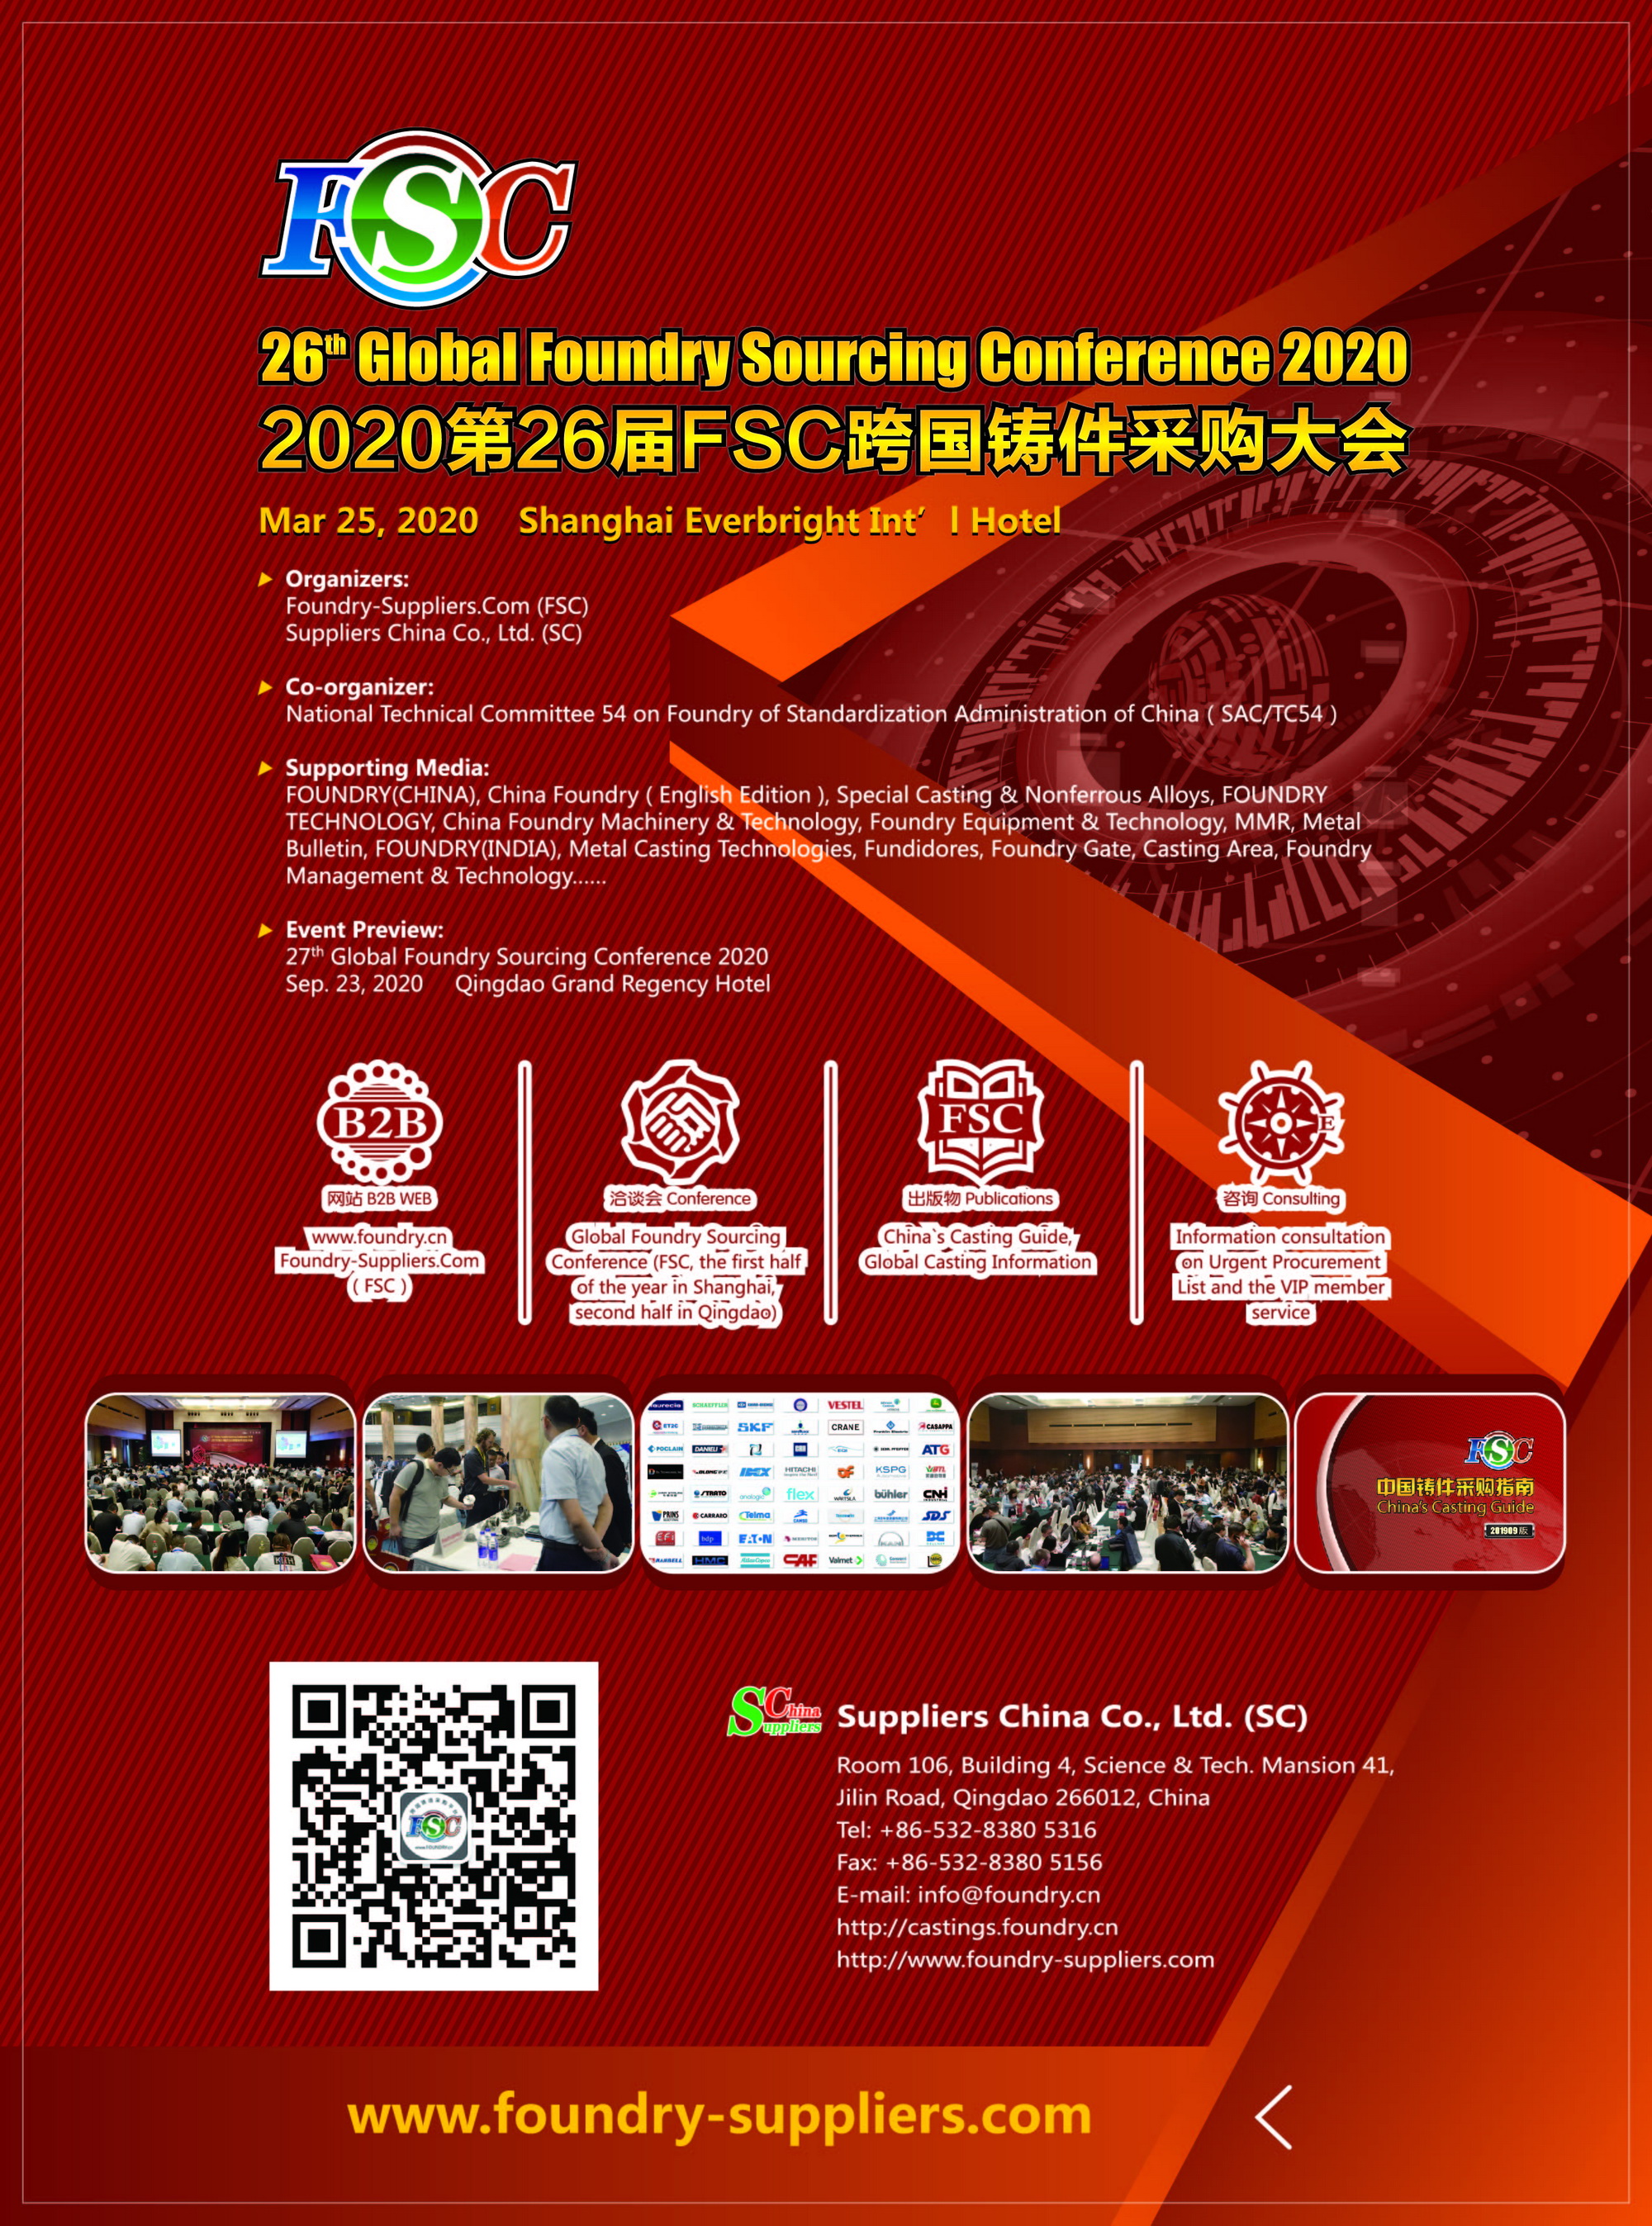 26th Global Foundry Sourcing Conference 2020, Shanghai, Shandong, China